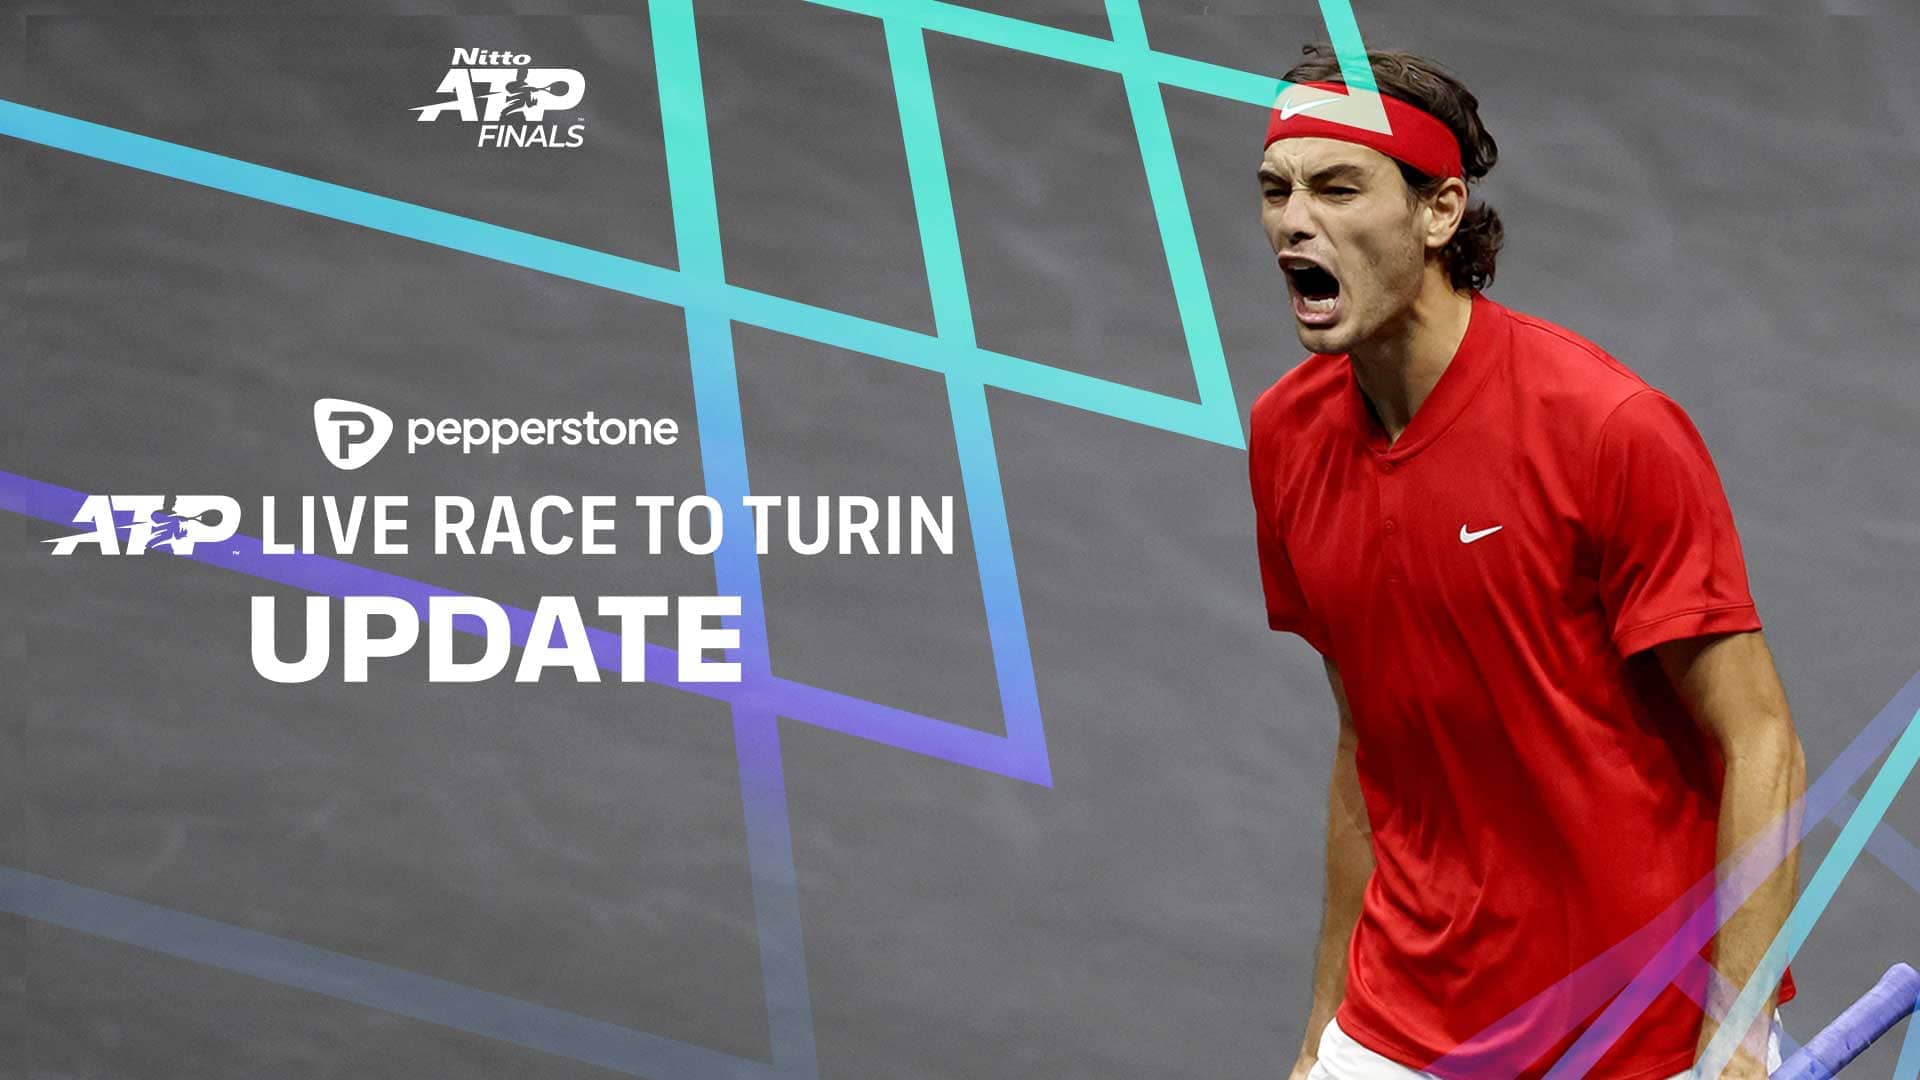 Fritz & Hurkacz Aiming To Make Moves As Turin Battle Heats Up, News  Article, Nitto ATP Finals